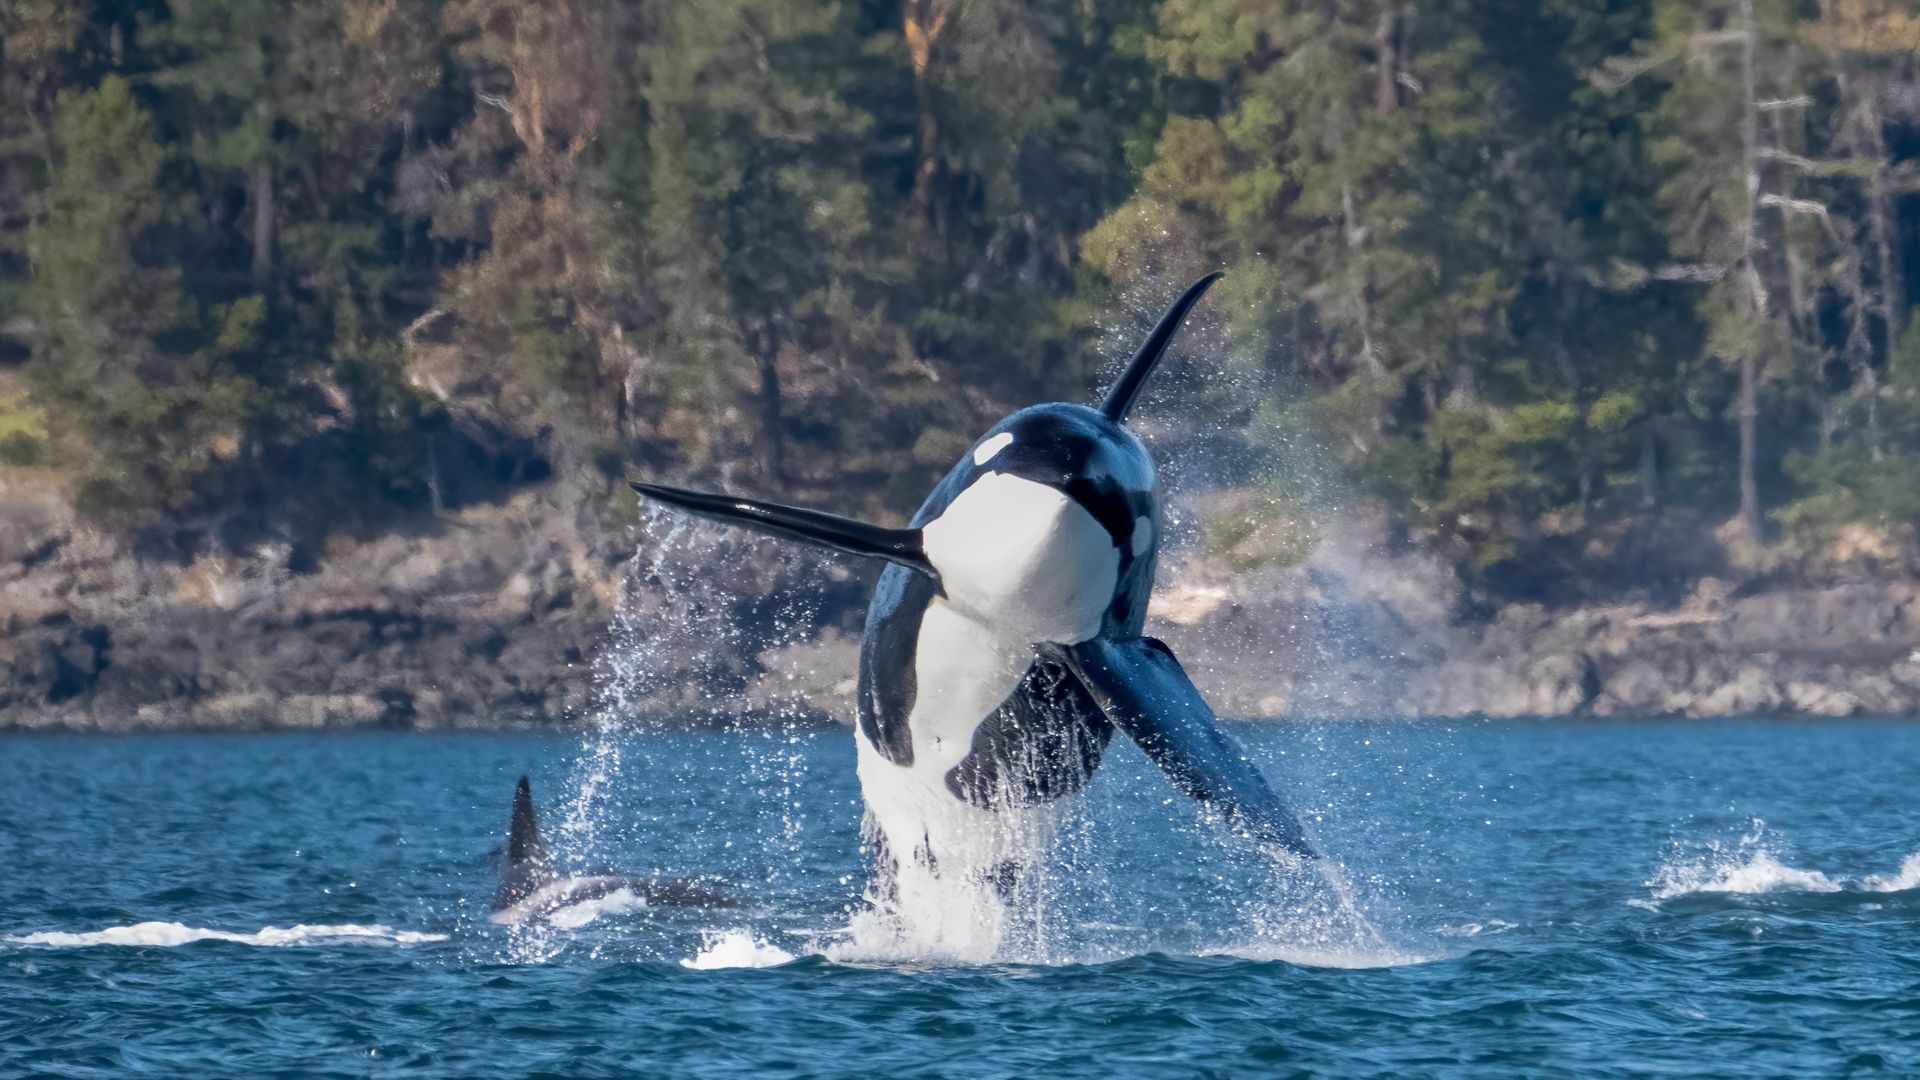 A killer whale breaches the surface of the water, as if leaping out of the ocean, with another whale's fin visible in the nearby waters and trees and the coast in the background.